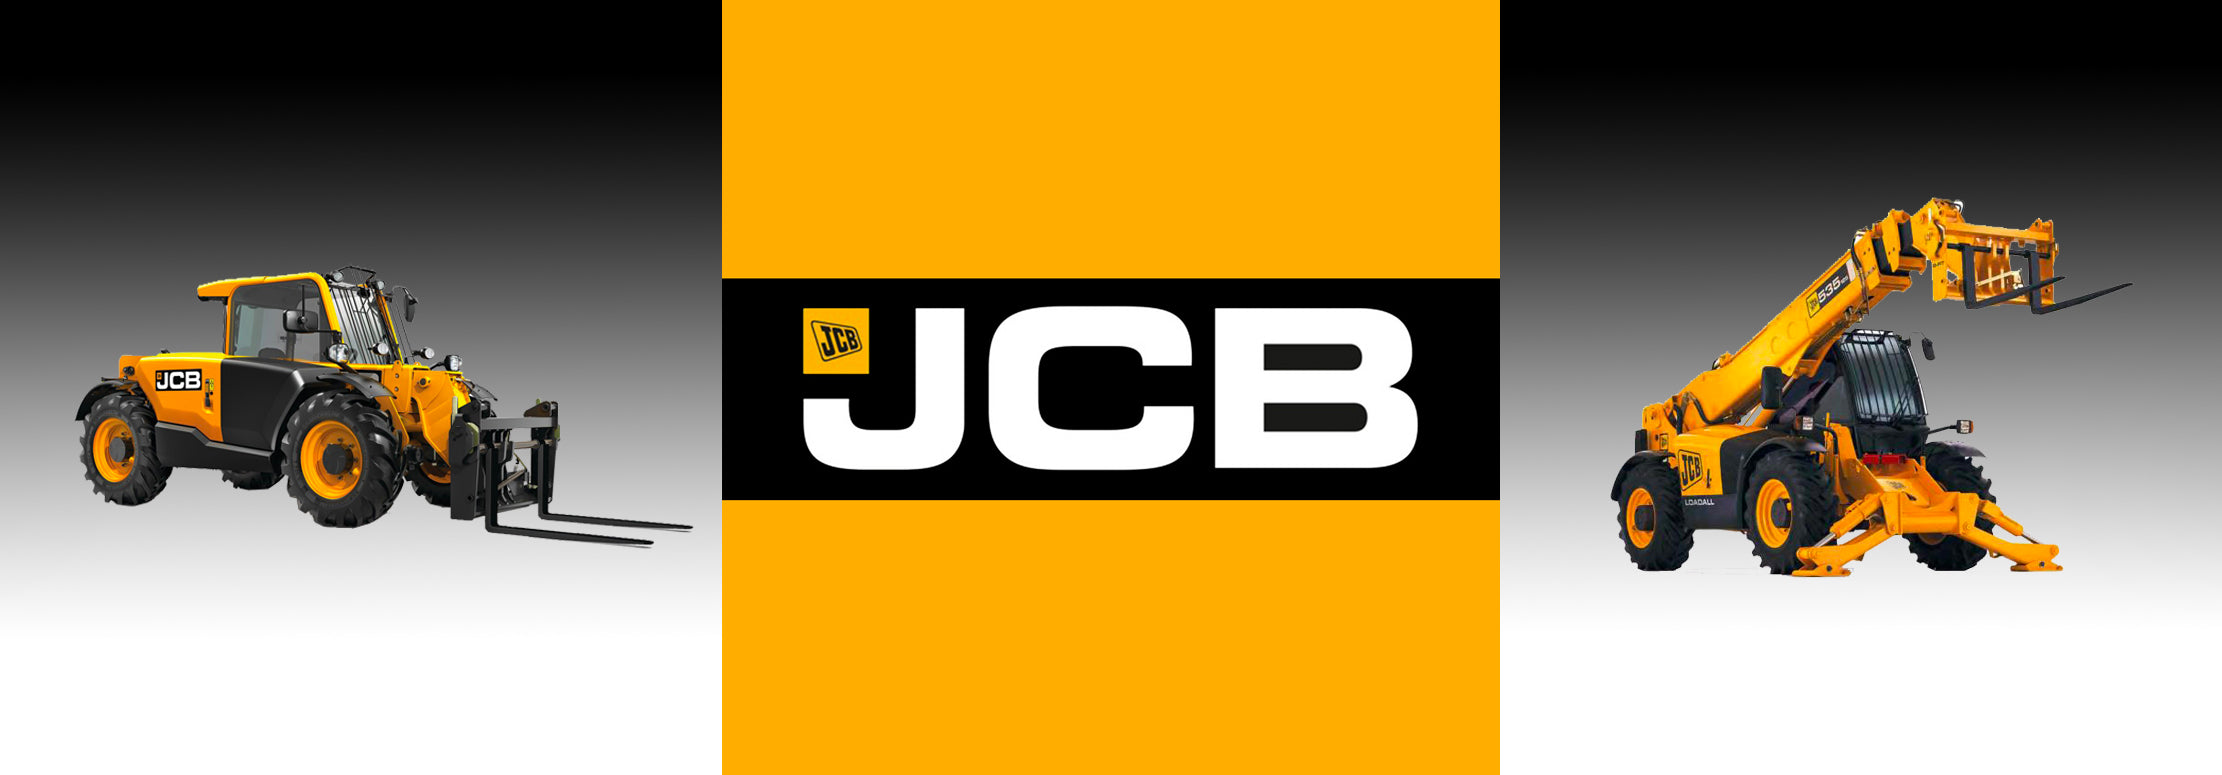 JCB Equipment tire covers tire socks tire boots drip protection diapers surface protection